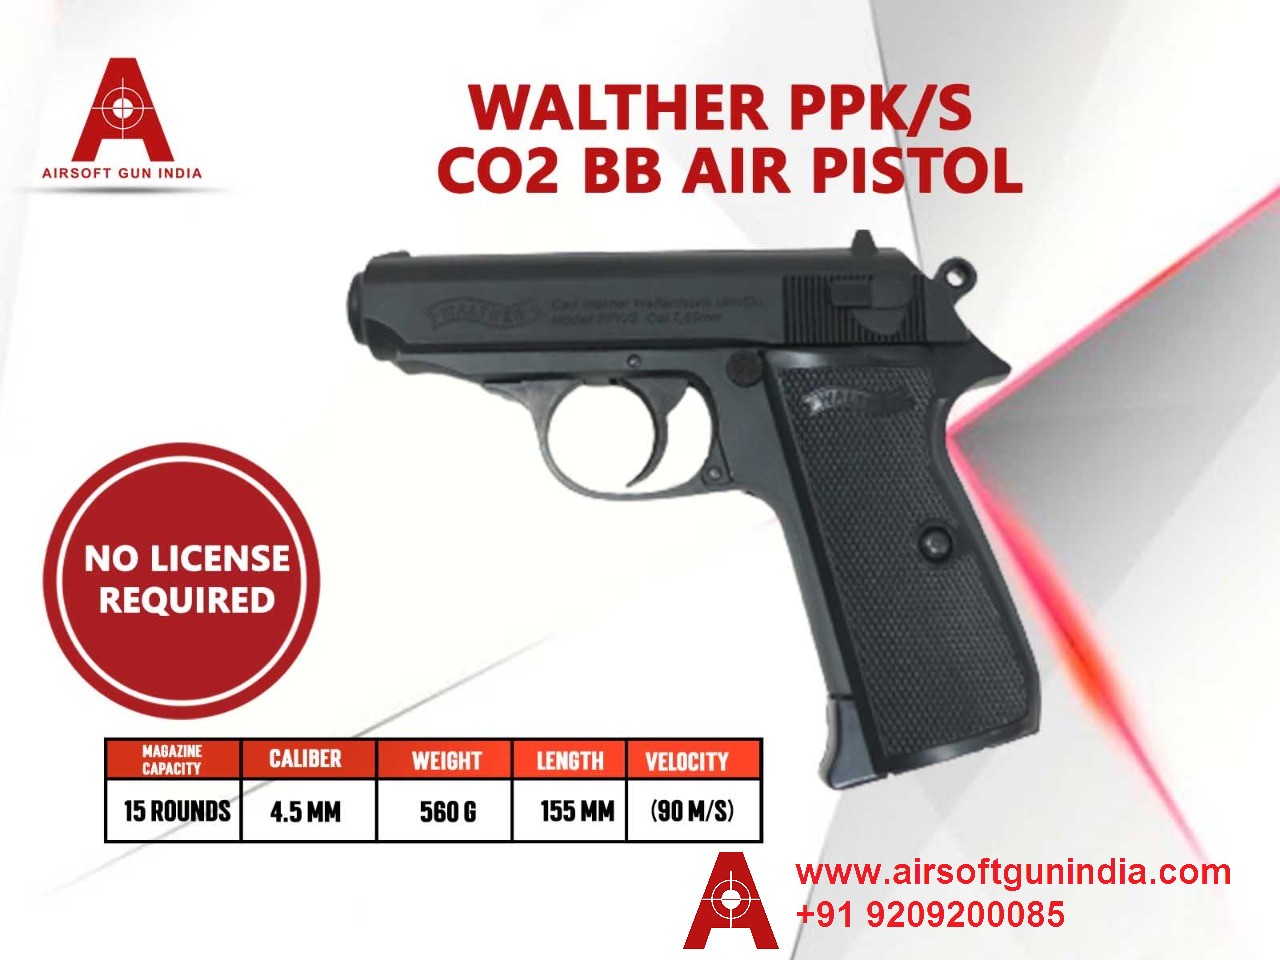 Walther PPK/S Cal.177, 4.5mm Co2 BB Air Pistol By Airsoft Gun India